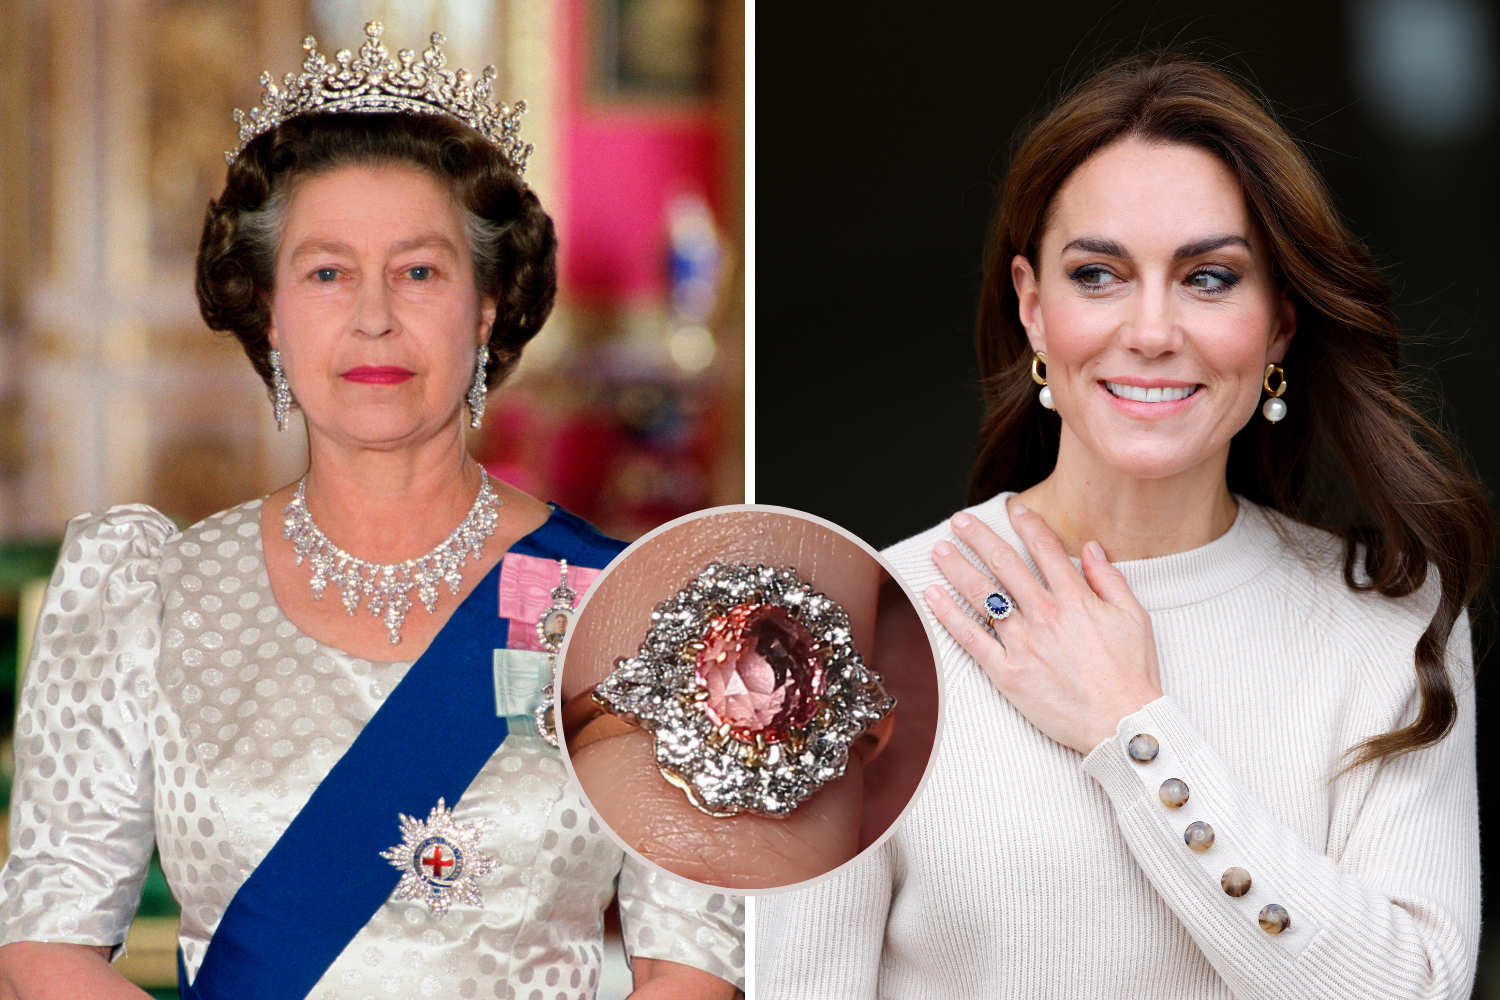 Meghan Markle's jewels: from Princess Diana's Asprey diamond cocktail ring  to Queen Elizabeth's US$2.8 million tiara, the Duchess of Sussex has worn  some of the world's most coveted gems | South China